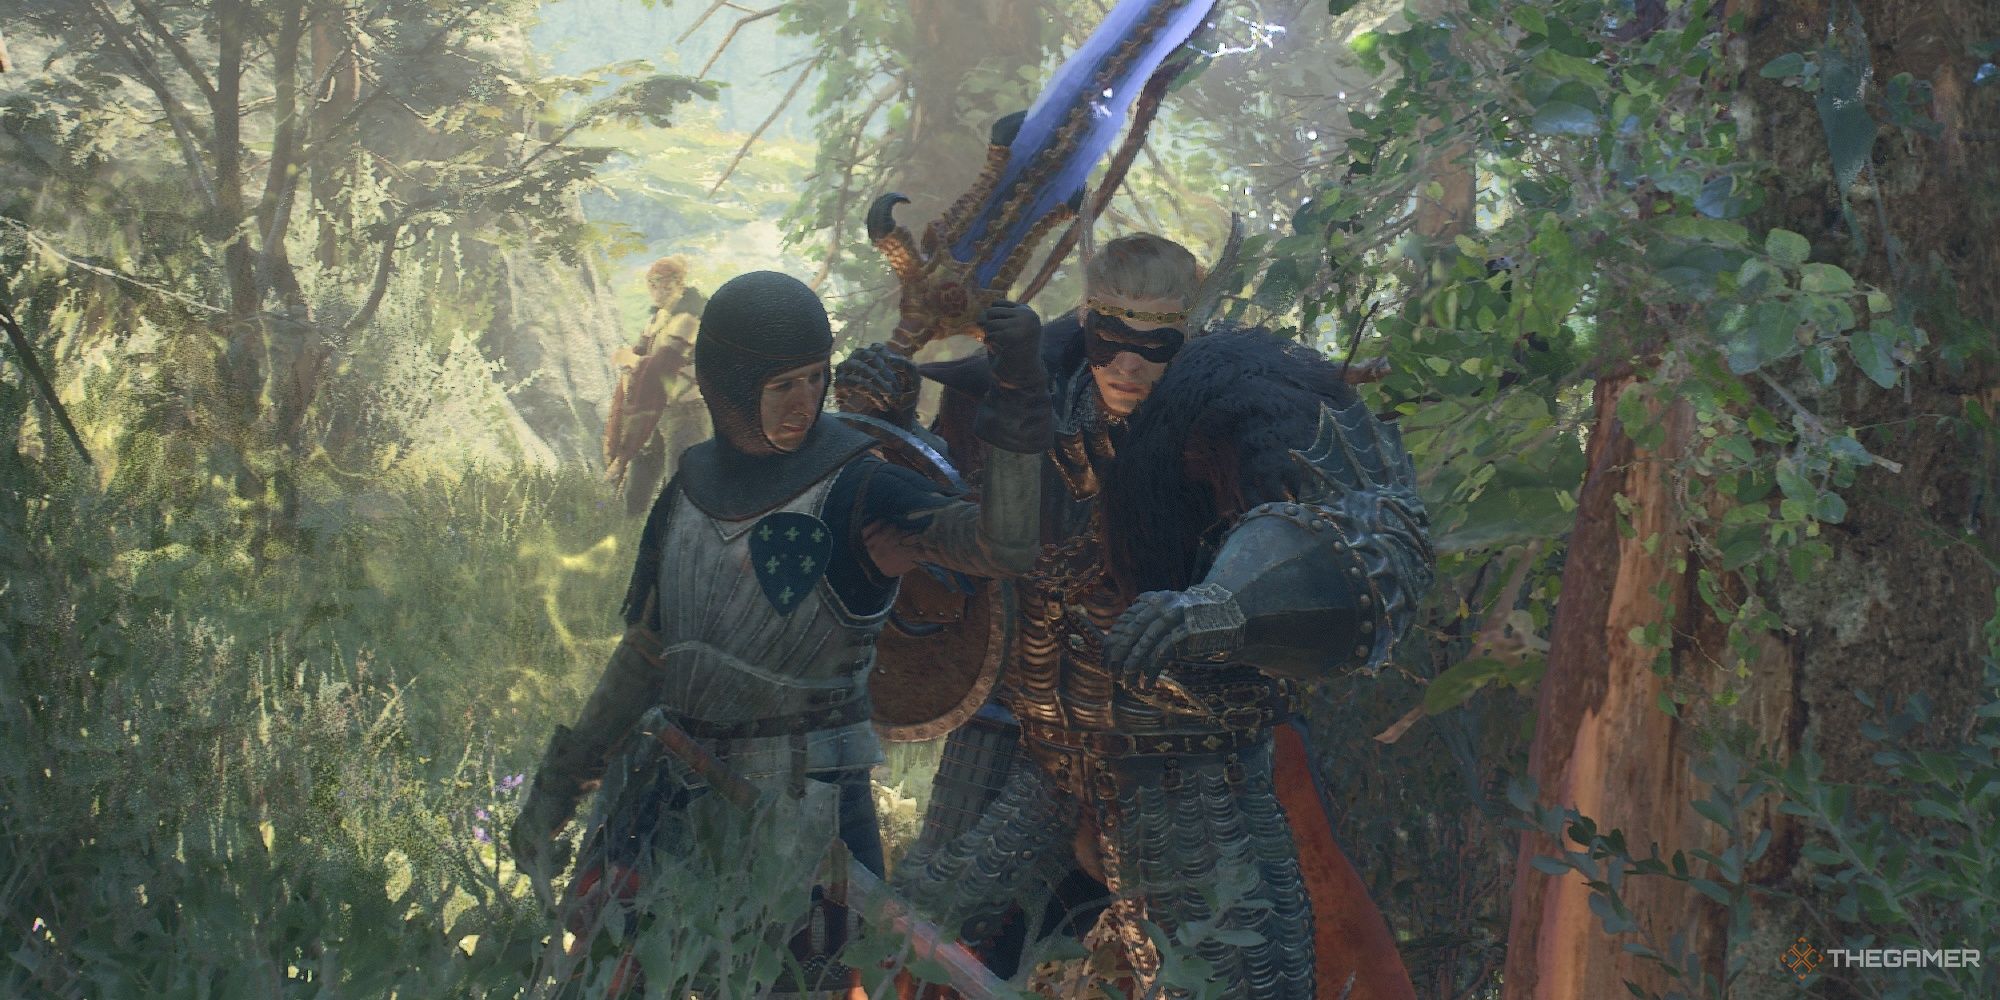 Accardo stands next to the Arisen during Ordeals of a New Recruit in Dragon's Dogma 2.